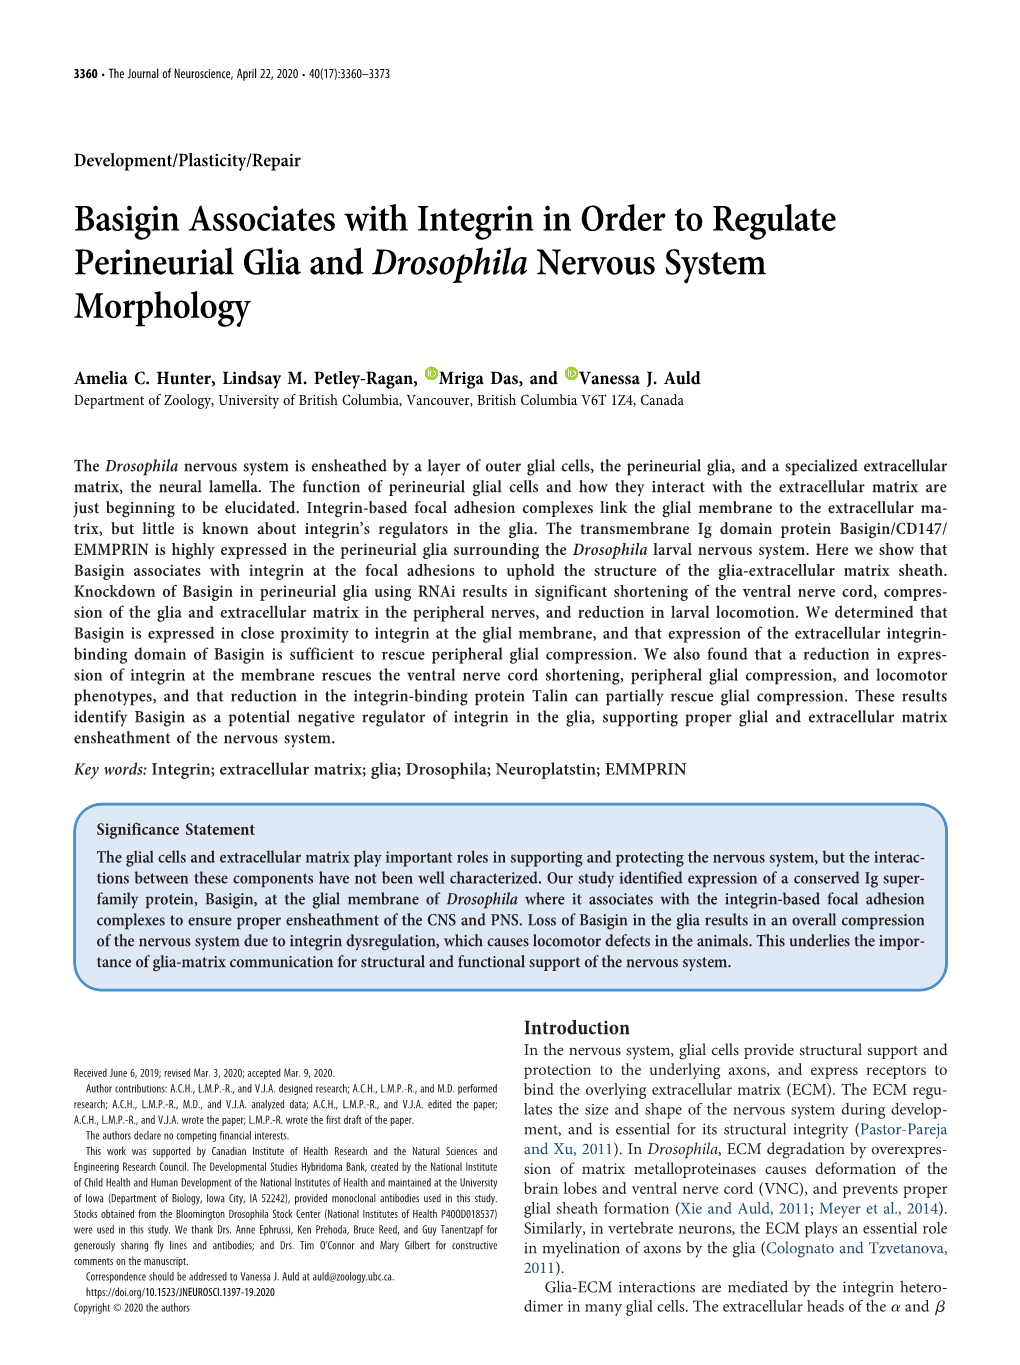 Basigin Associates with Integrin in Order to Regulate Perineurial Glia and Drosophila Nervous System Morphology